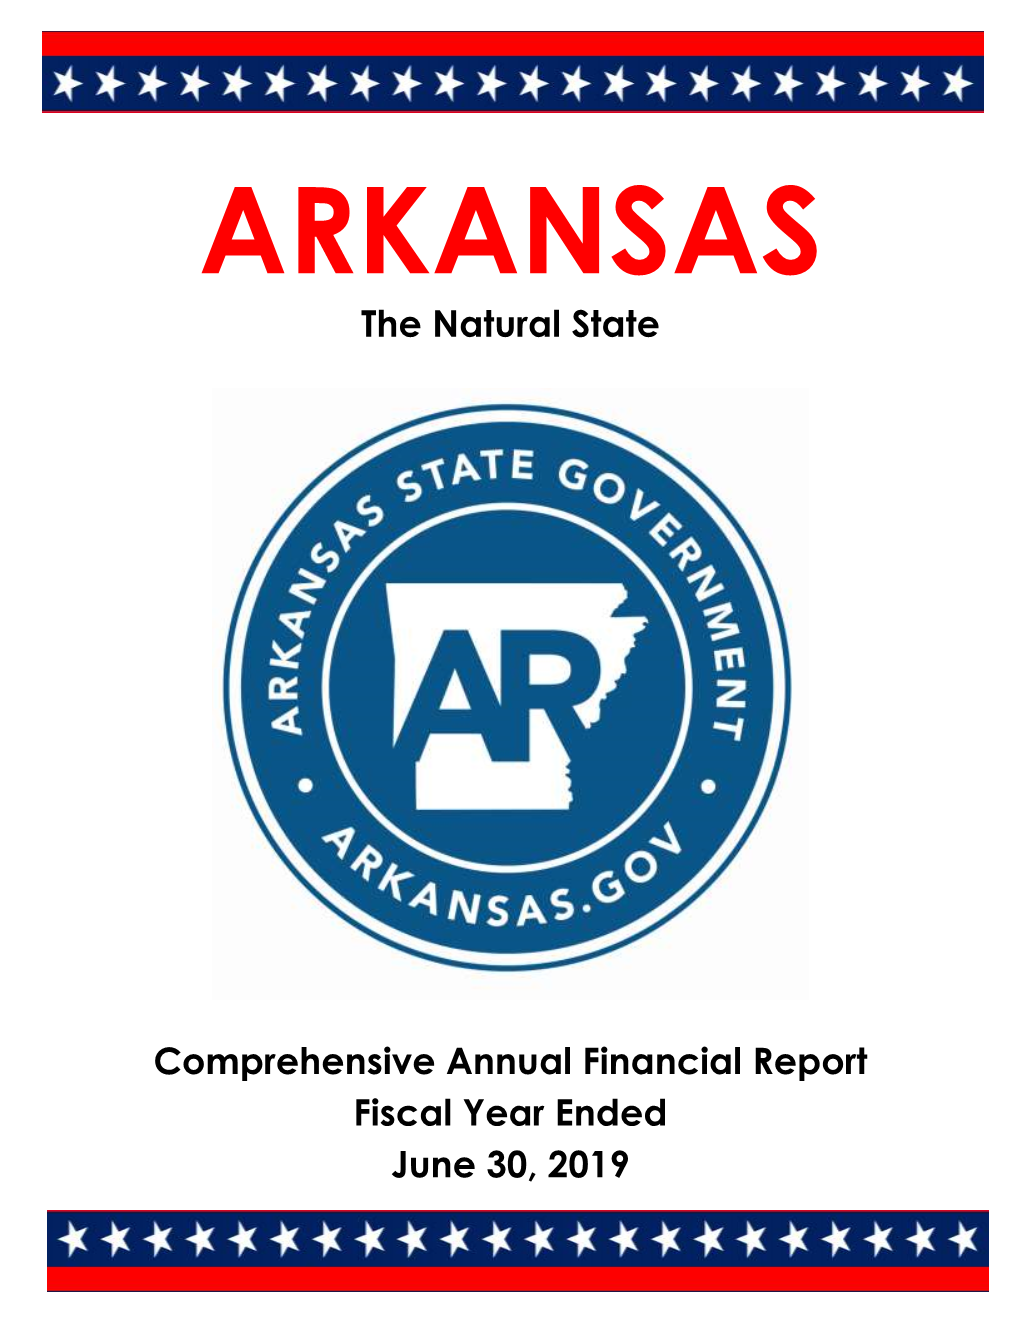 The Natural State Comprehensive Annual